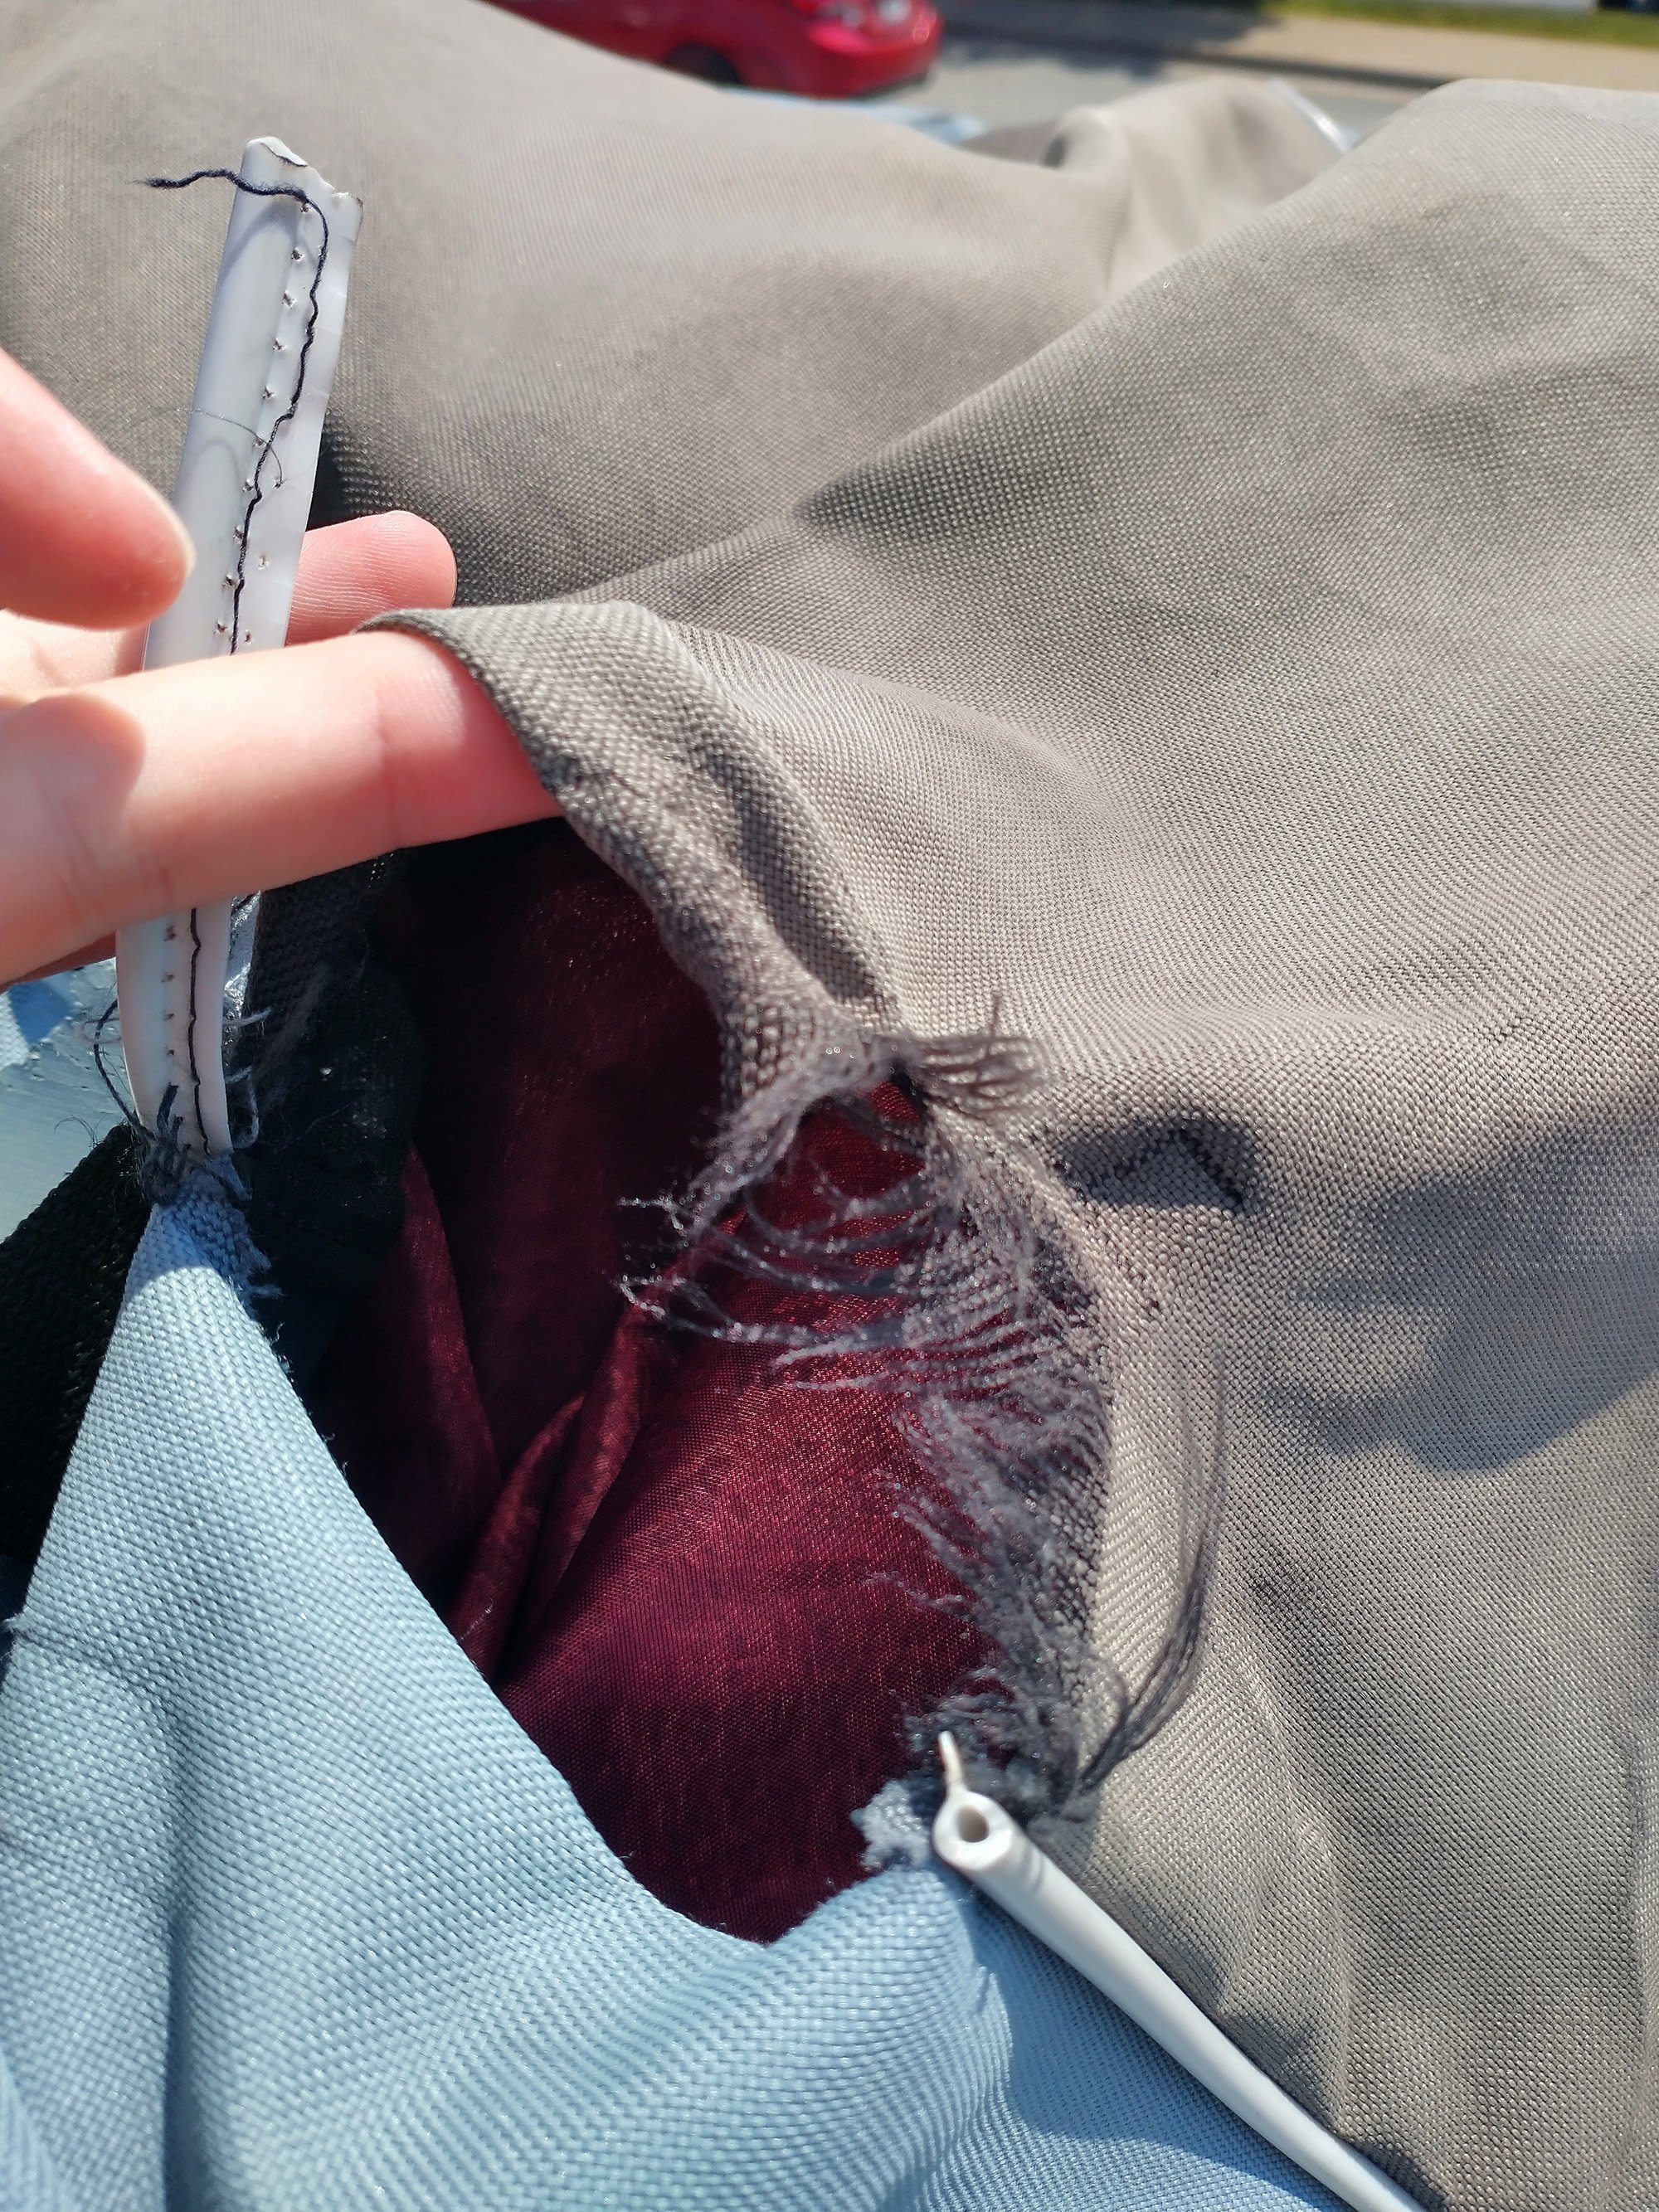 The rooftop bag was now falling apart faster and faster. Many holes on both sides and the back...